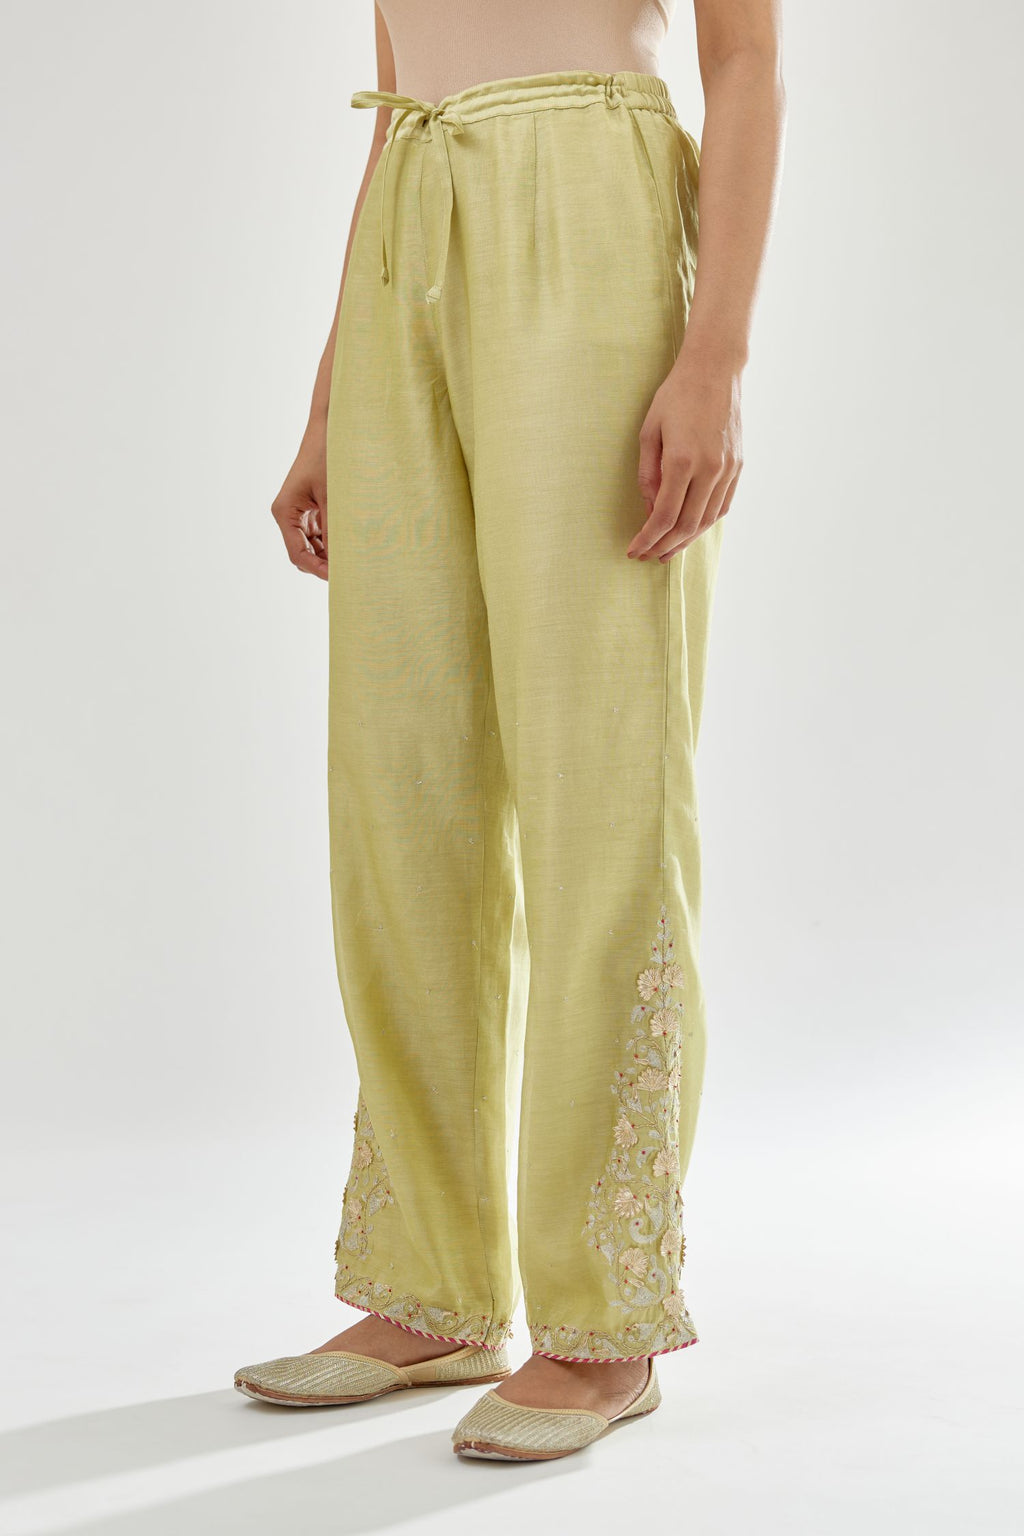 Green silk chanderi straight pants, hem is detailed with zari, dori and gota embroidered boota at sides.